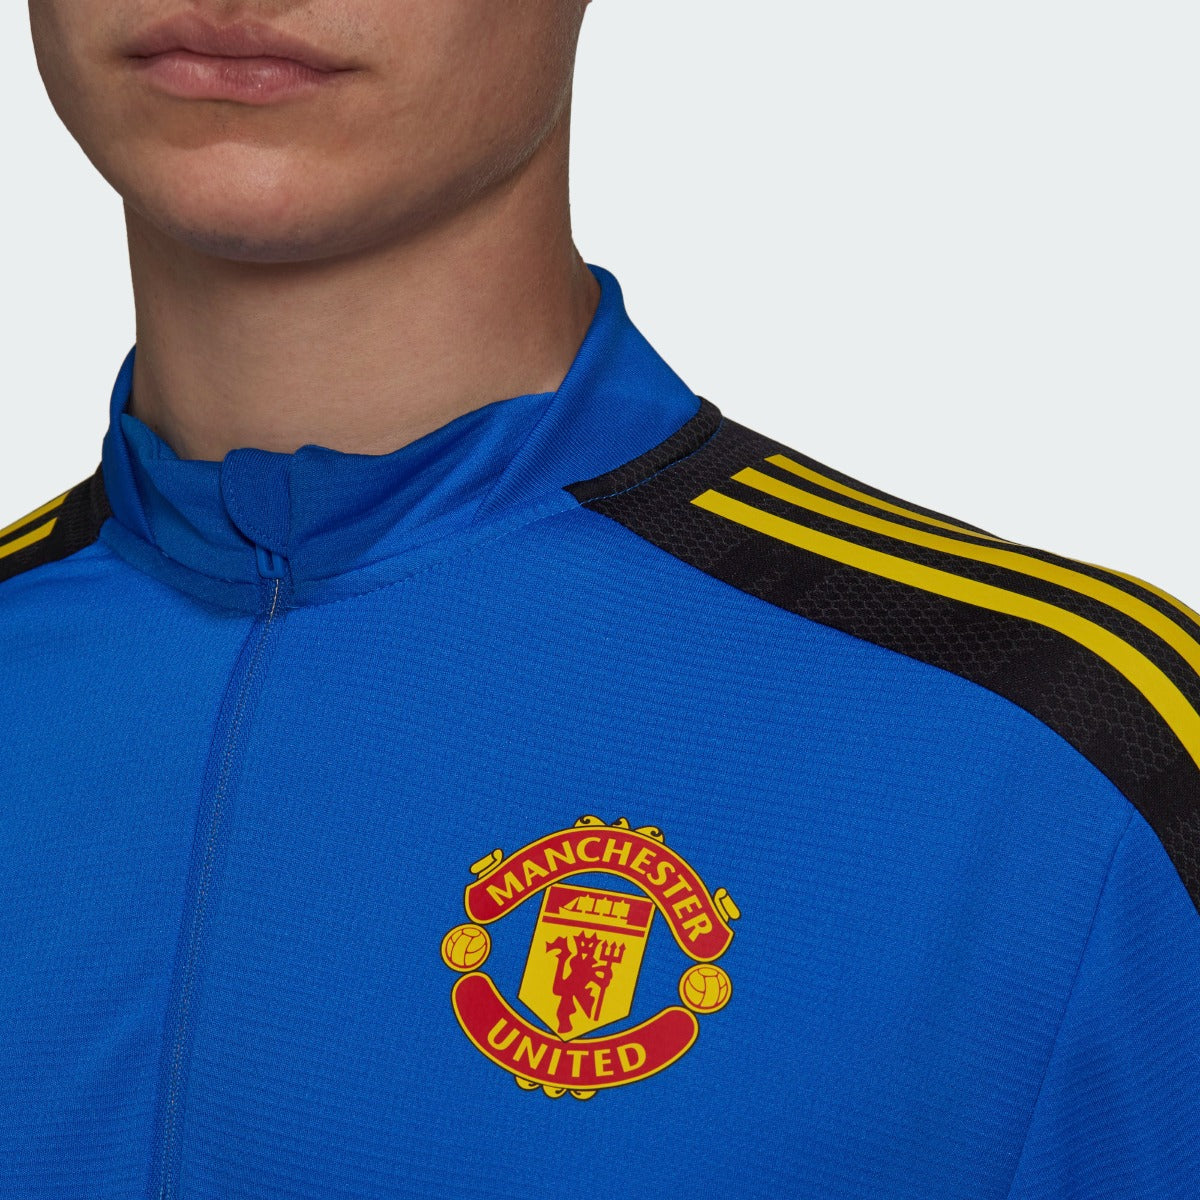 Adidas 2021-22 Manchester United Euro Training Top - Glow Blue (Detail 1)